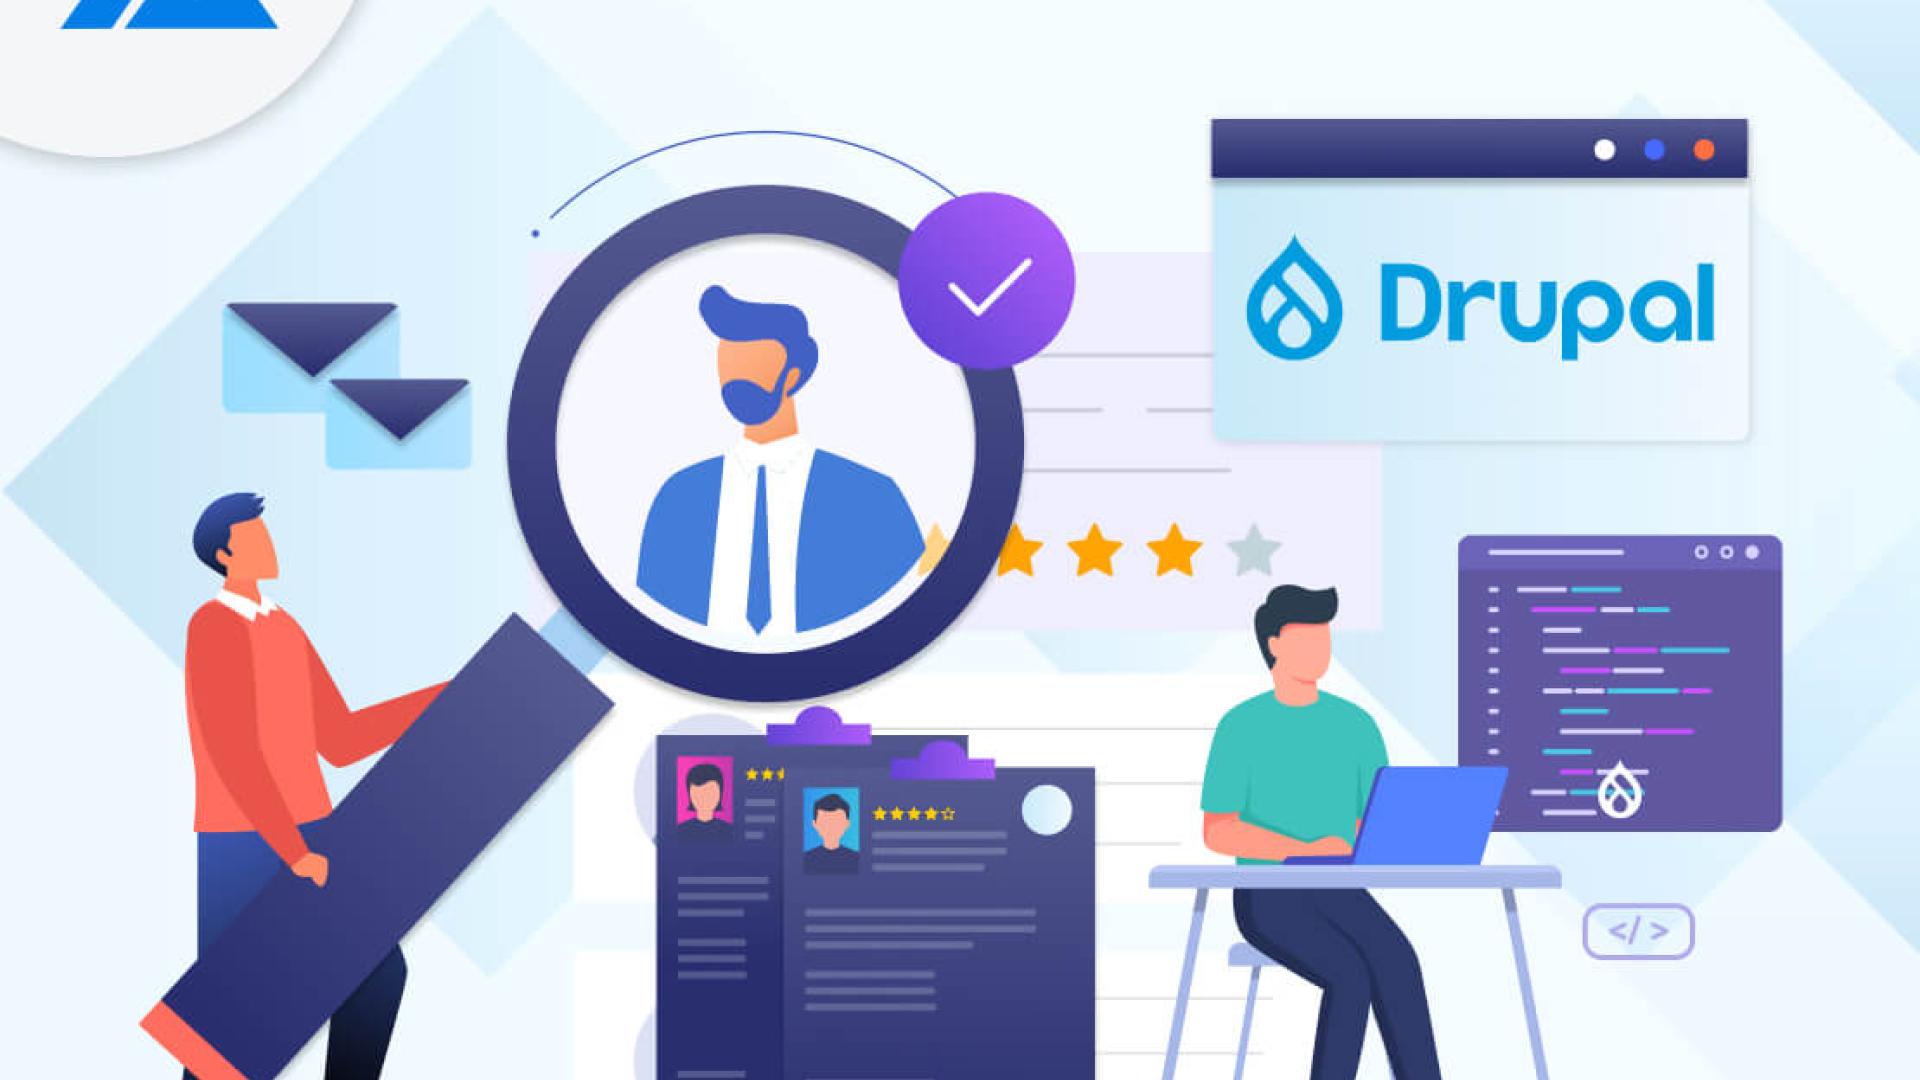 How To Hire A Great Drupal Developer - A Step By Step Guide